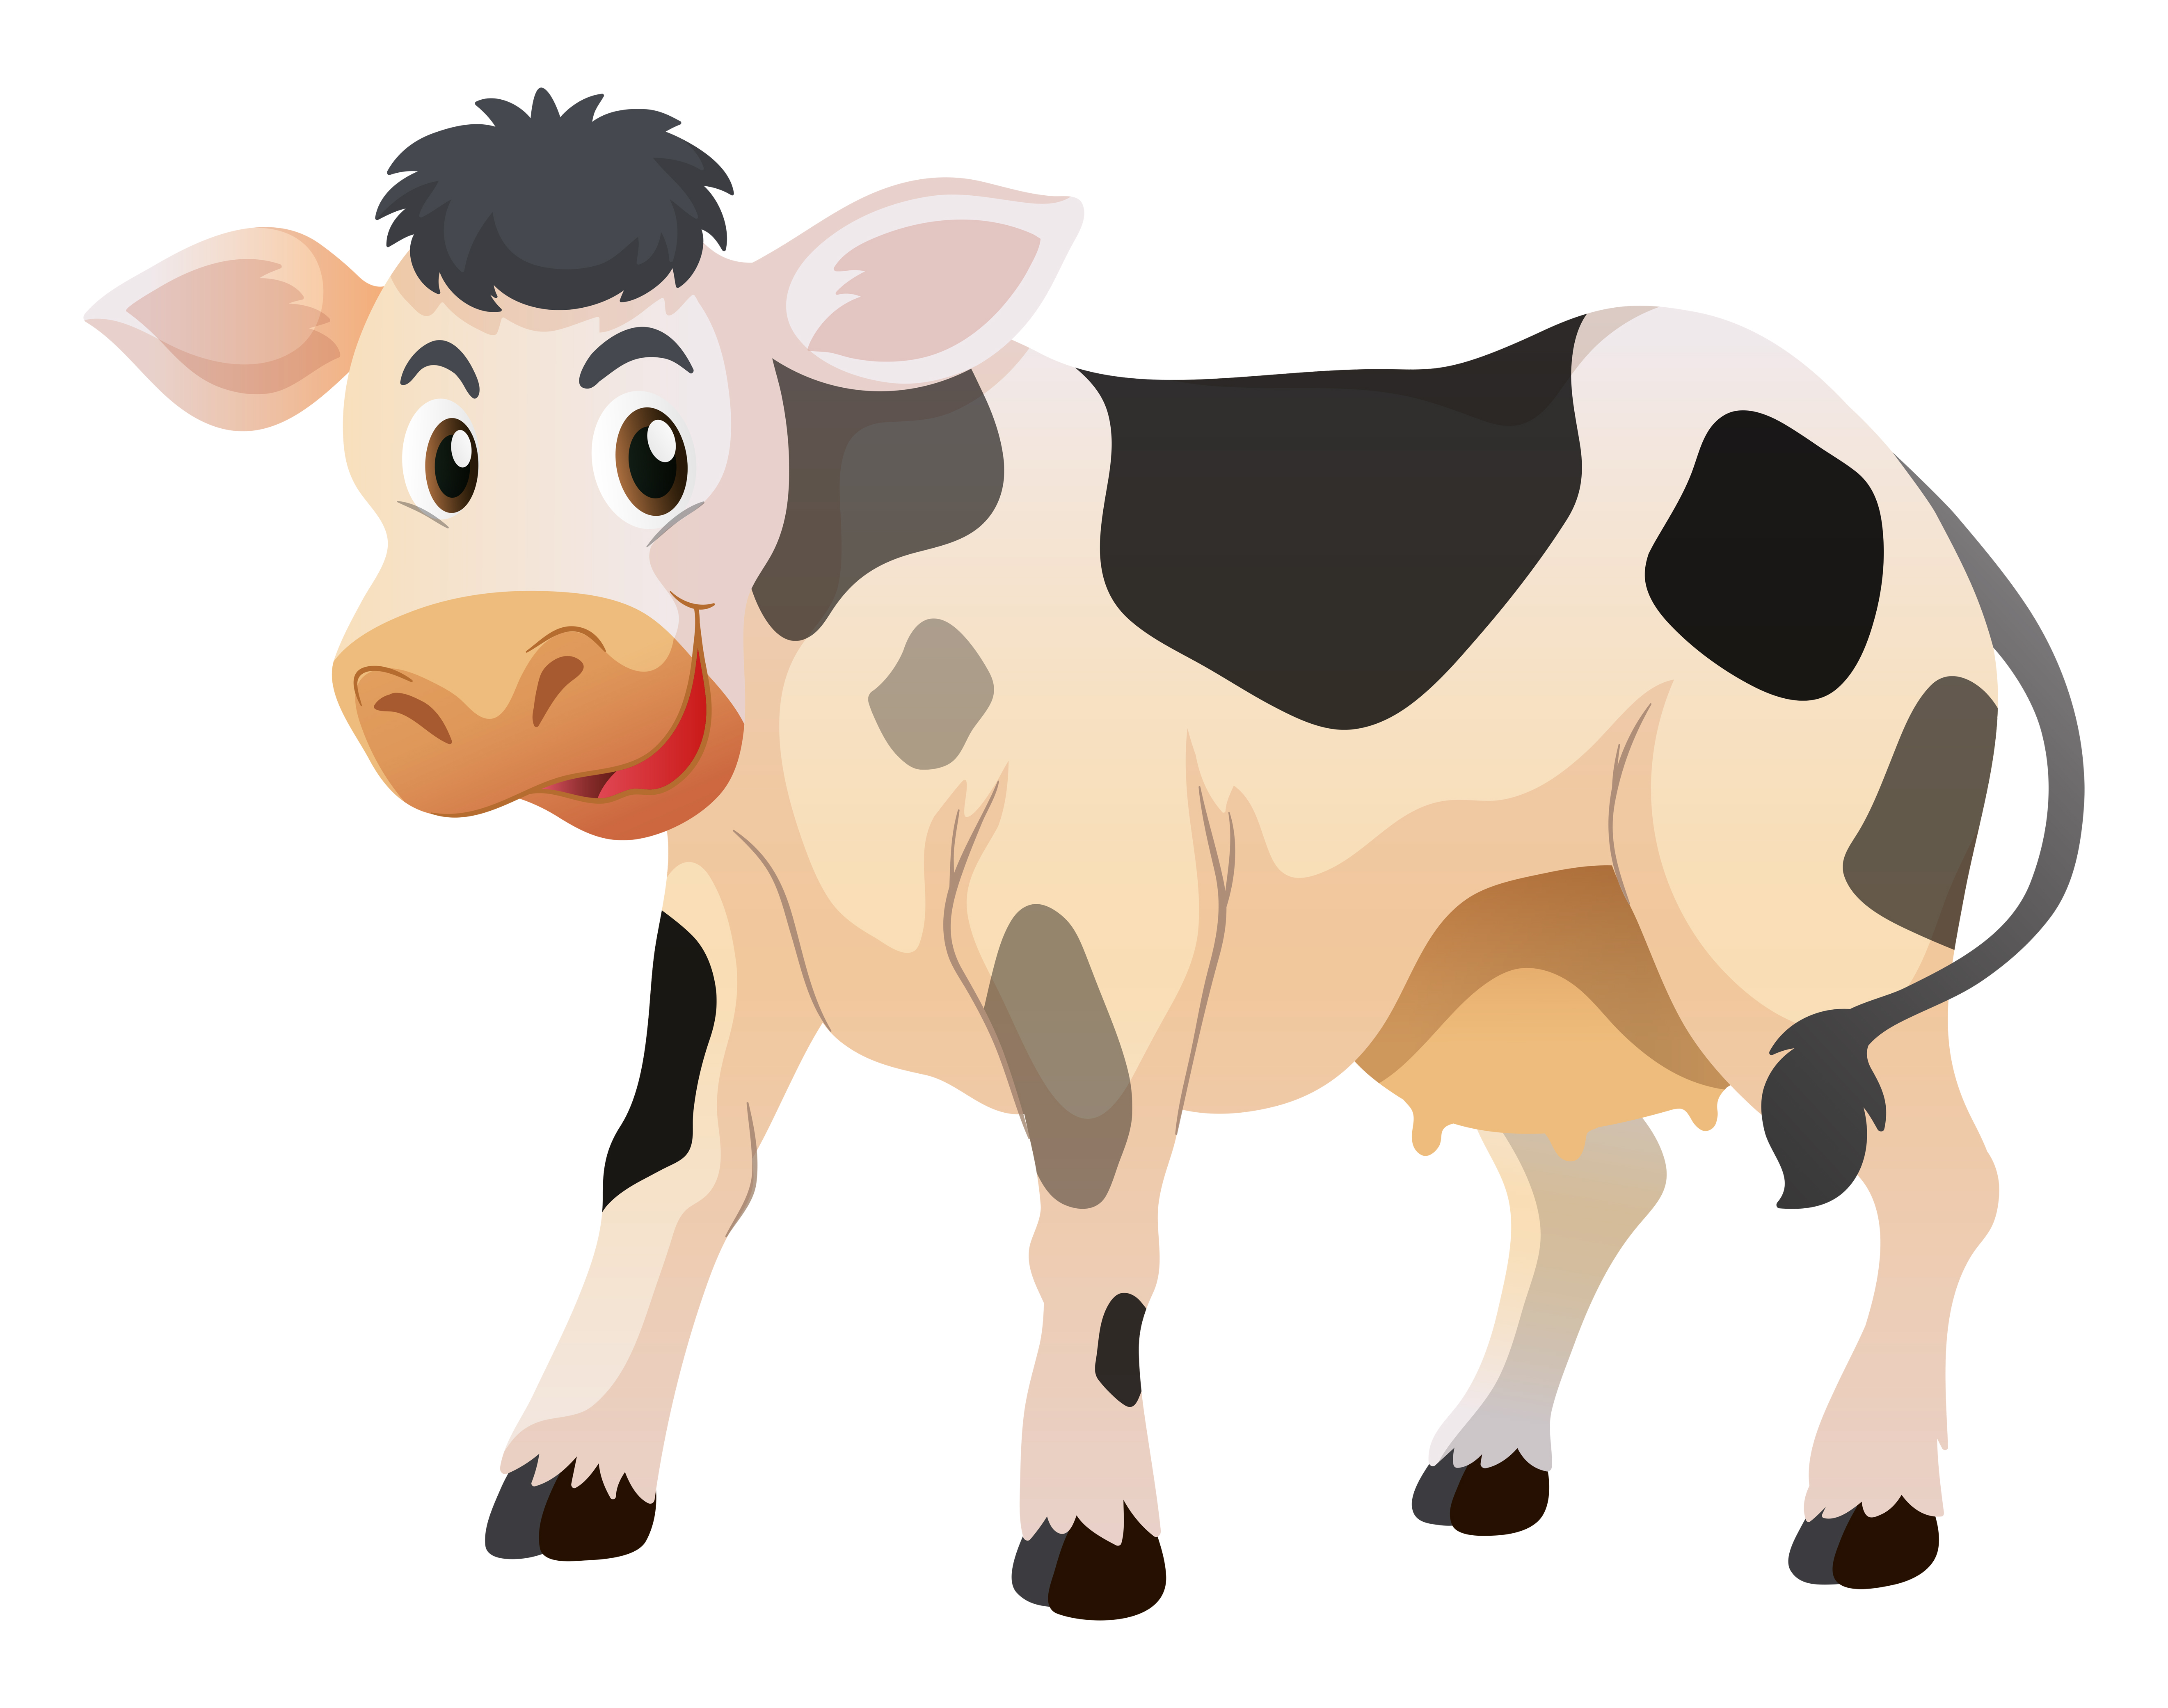 2. Adorable Cow Tattoo Ideas - wide 6